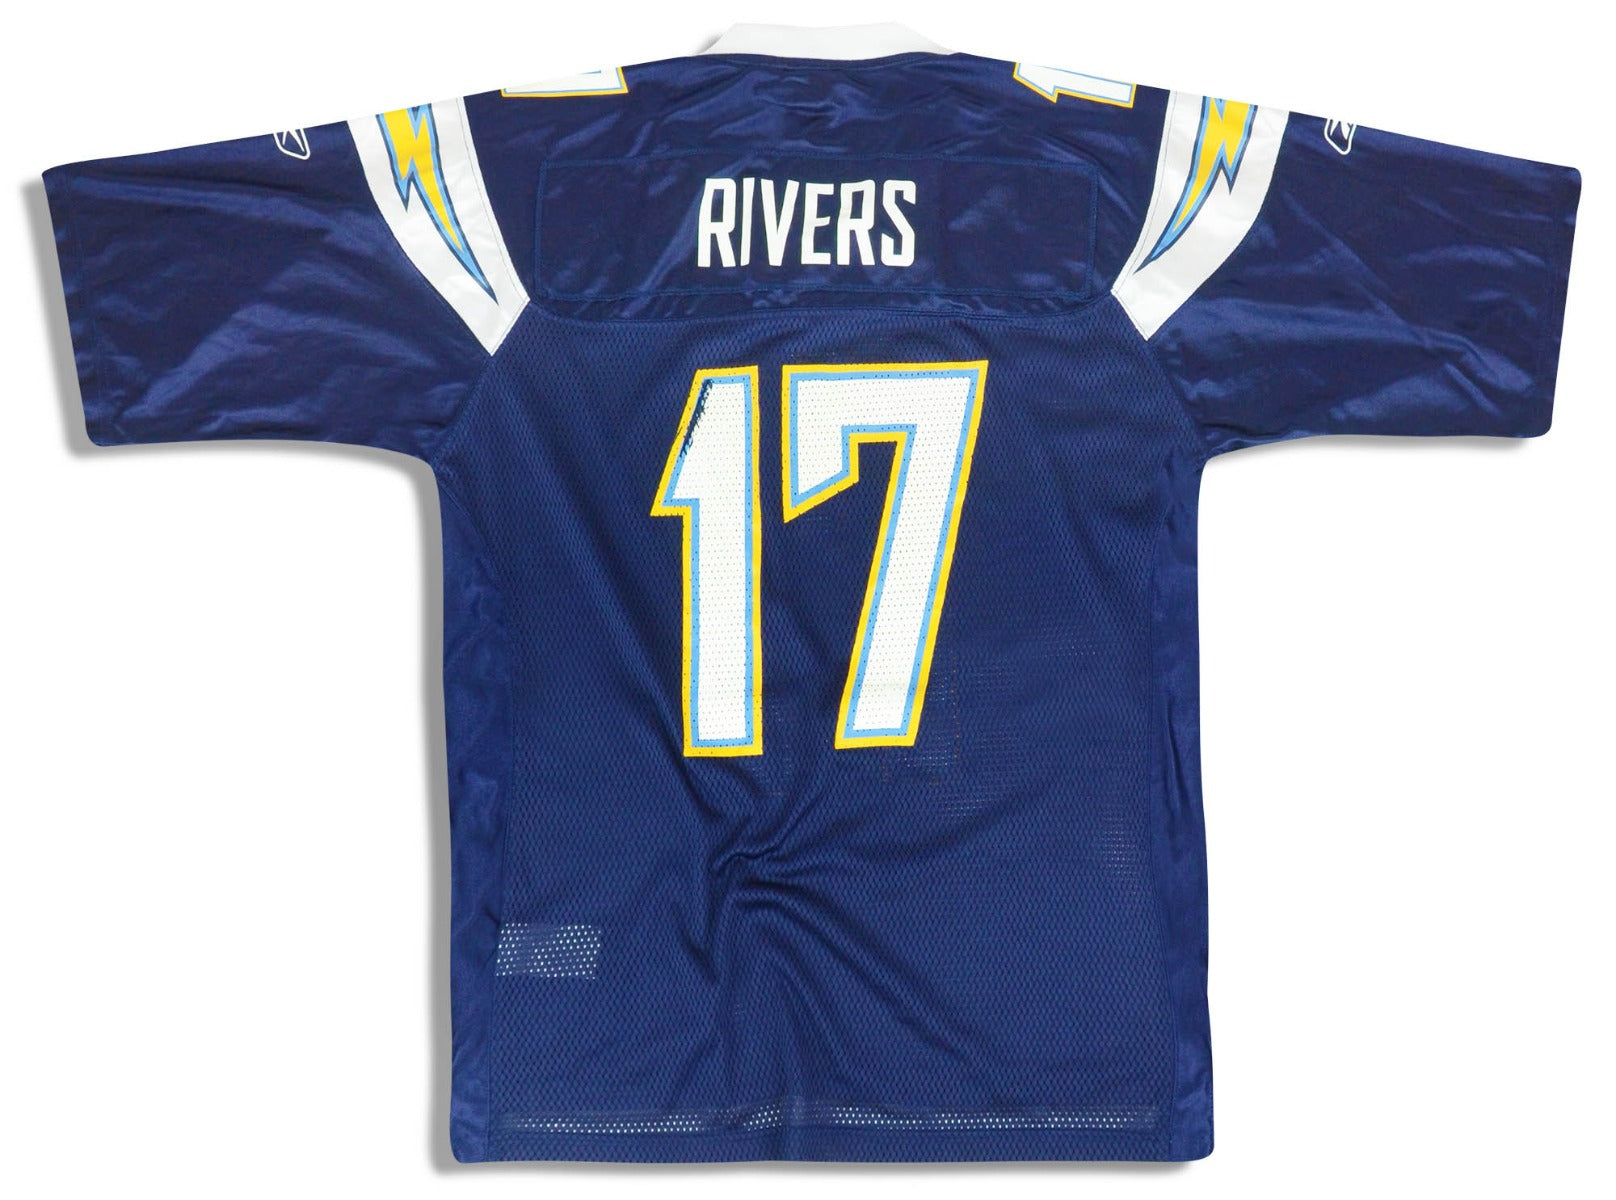 2008-11 SAN DIEGO CHARGERS RIVERS #17 REEBOK ON FIELD JERSEY (HOME